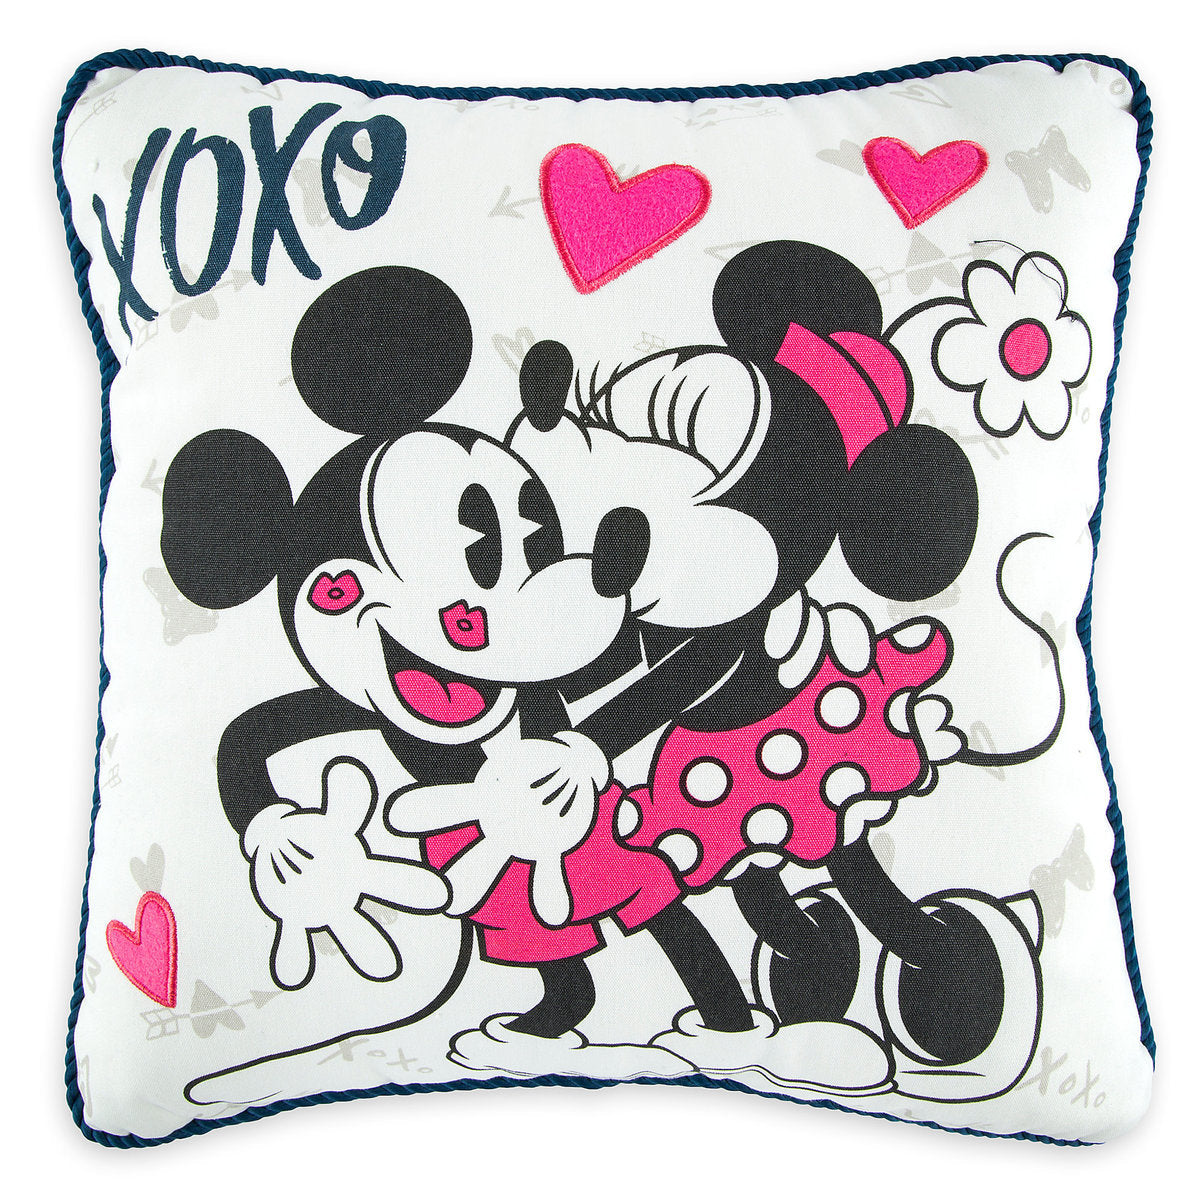 Disney Parks Mickey and Minnie Mouse Sweethearts Kissing Pillow Je t' aime New